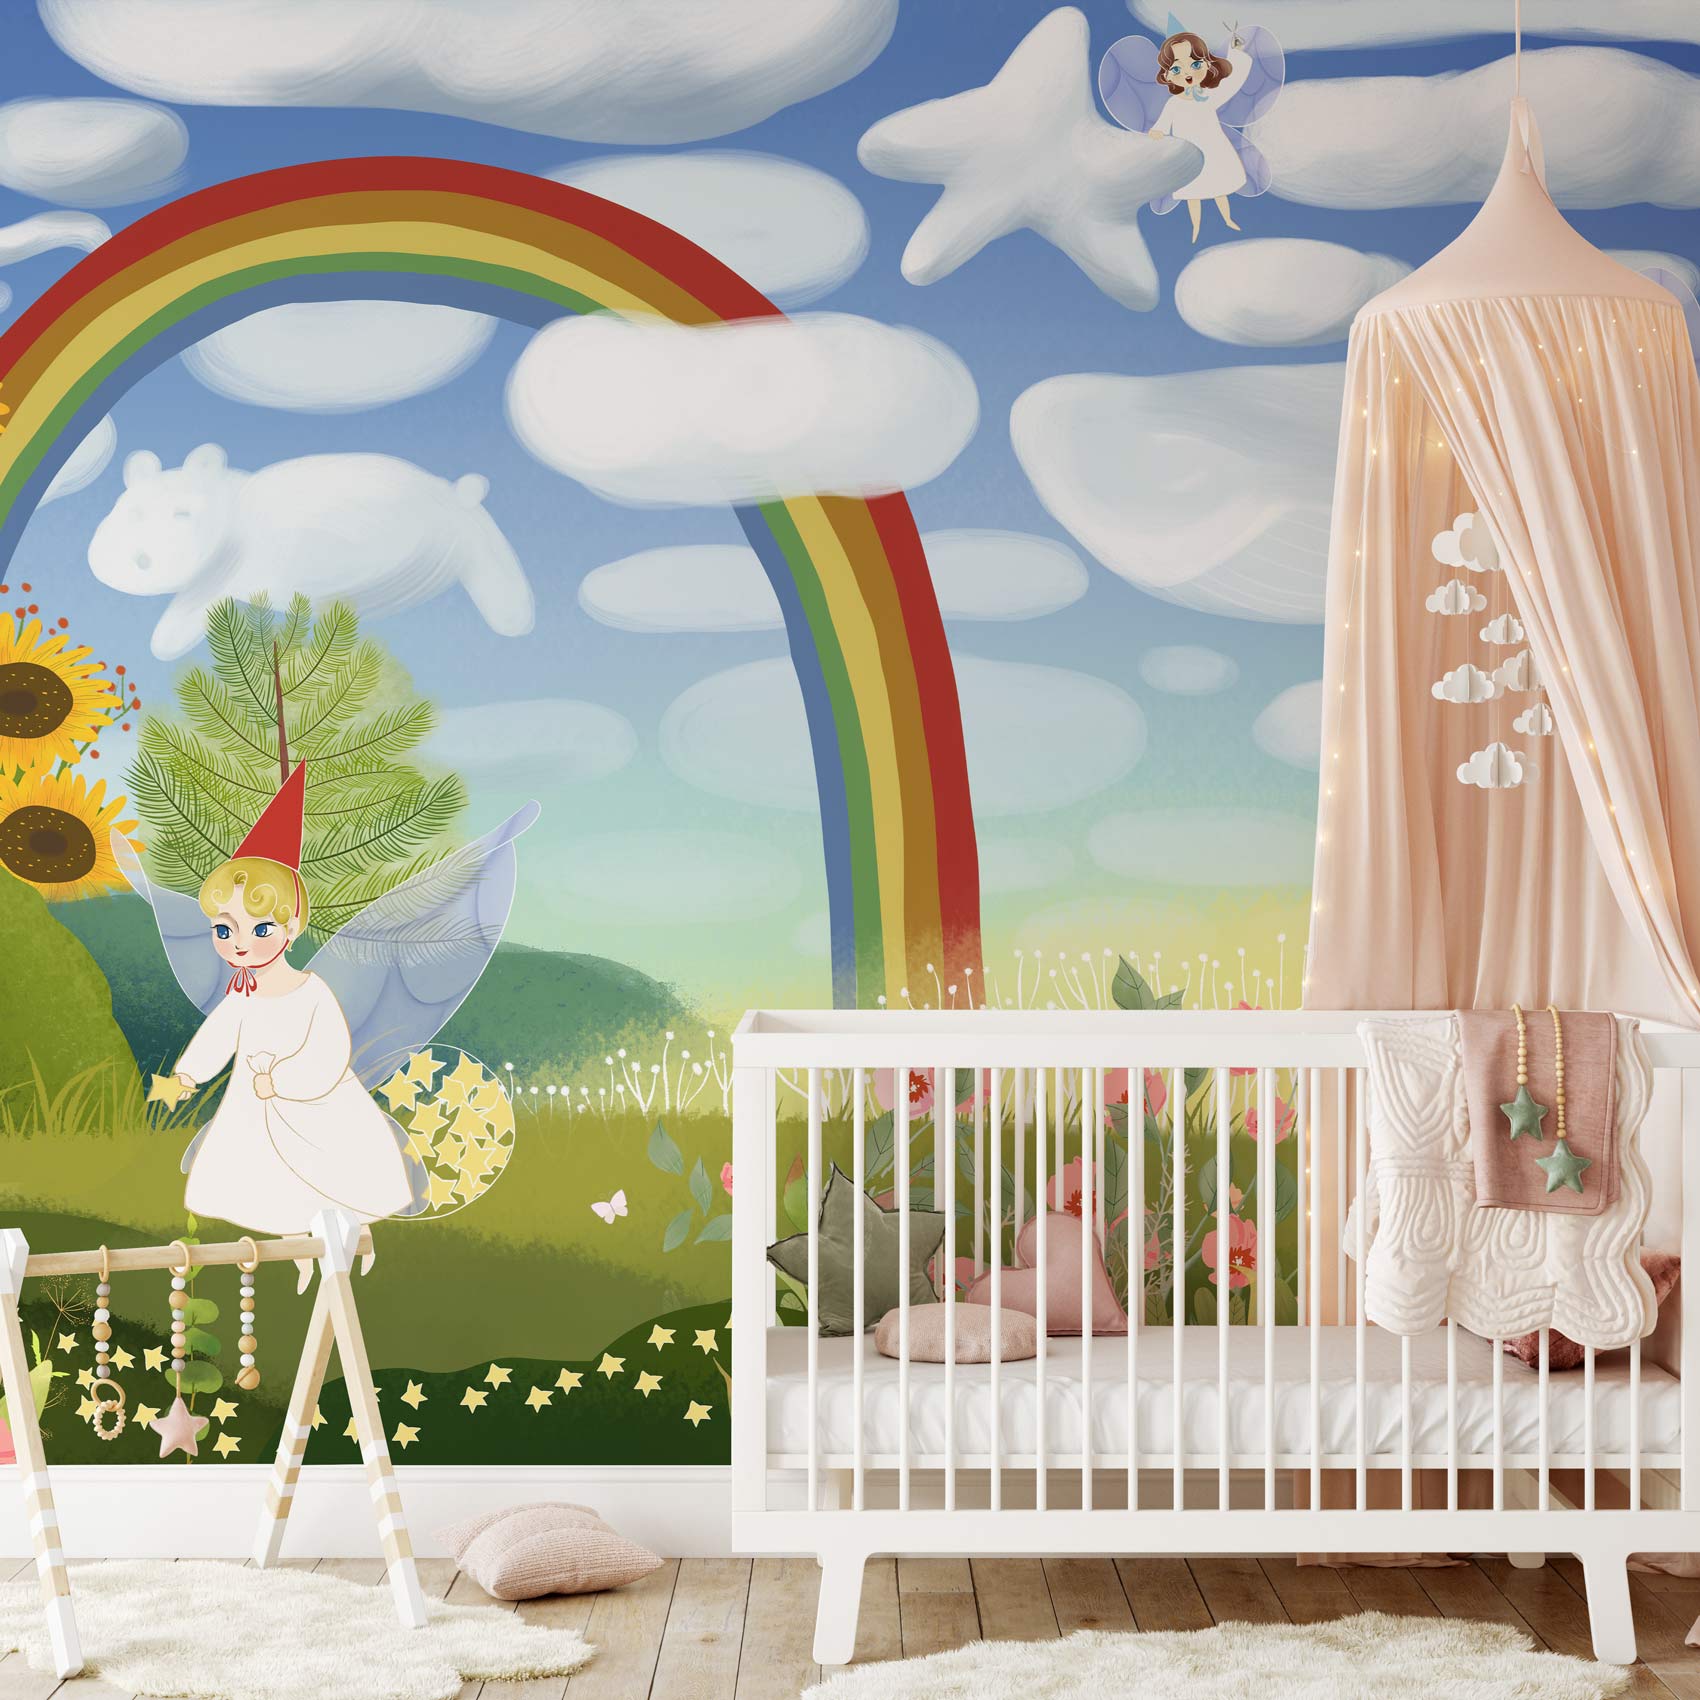 Decorate your nursery with this adorable Elves Gardener Flower Wallpaper Mural.